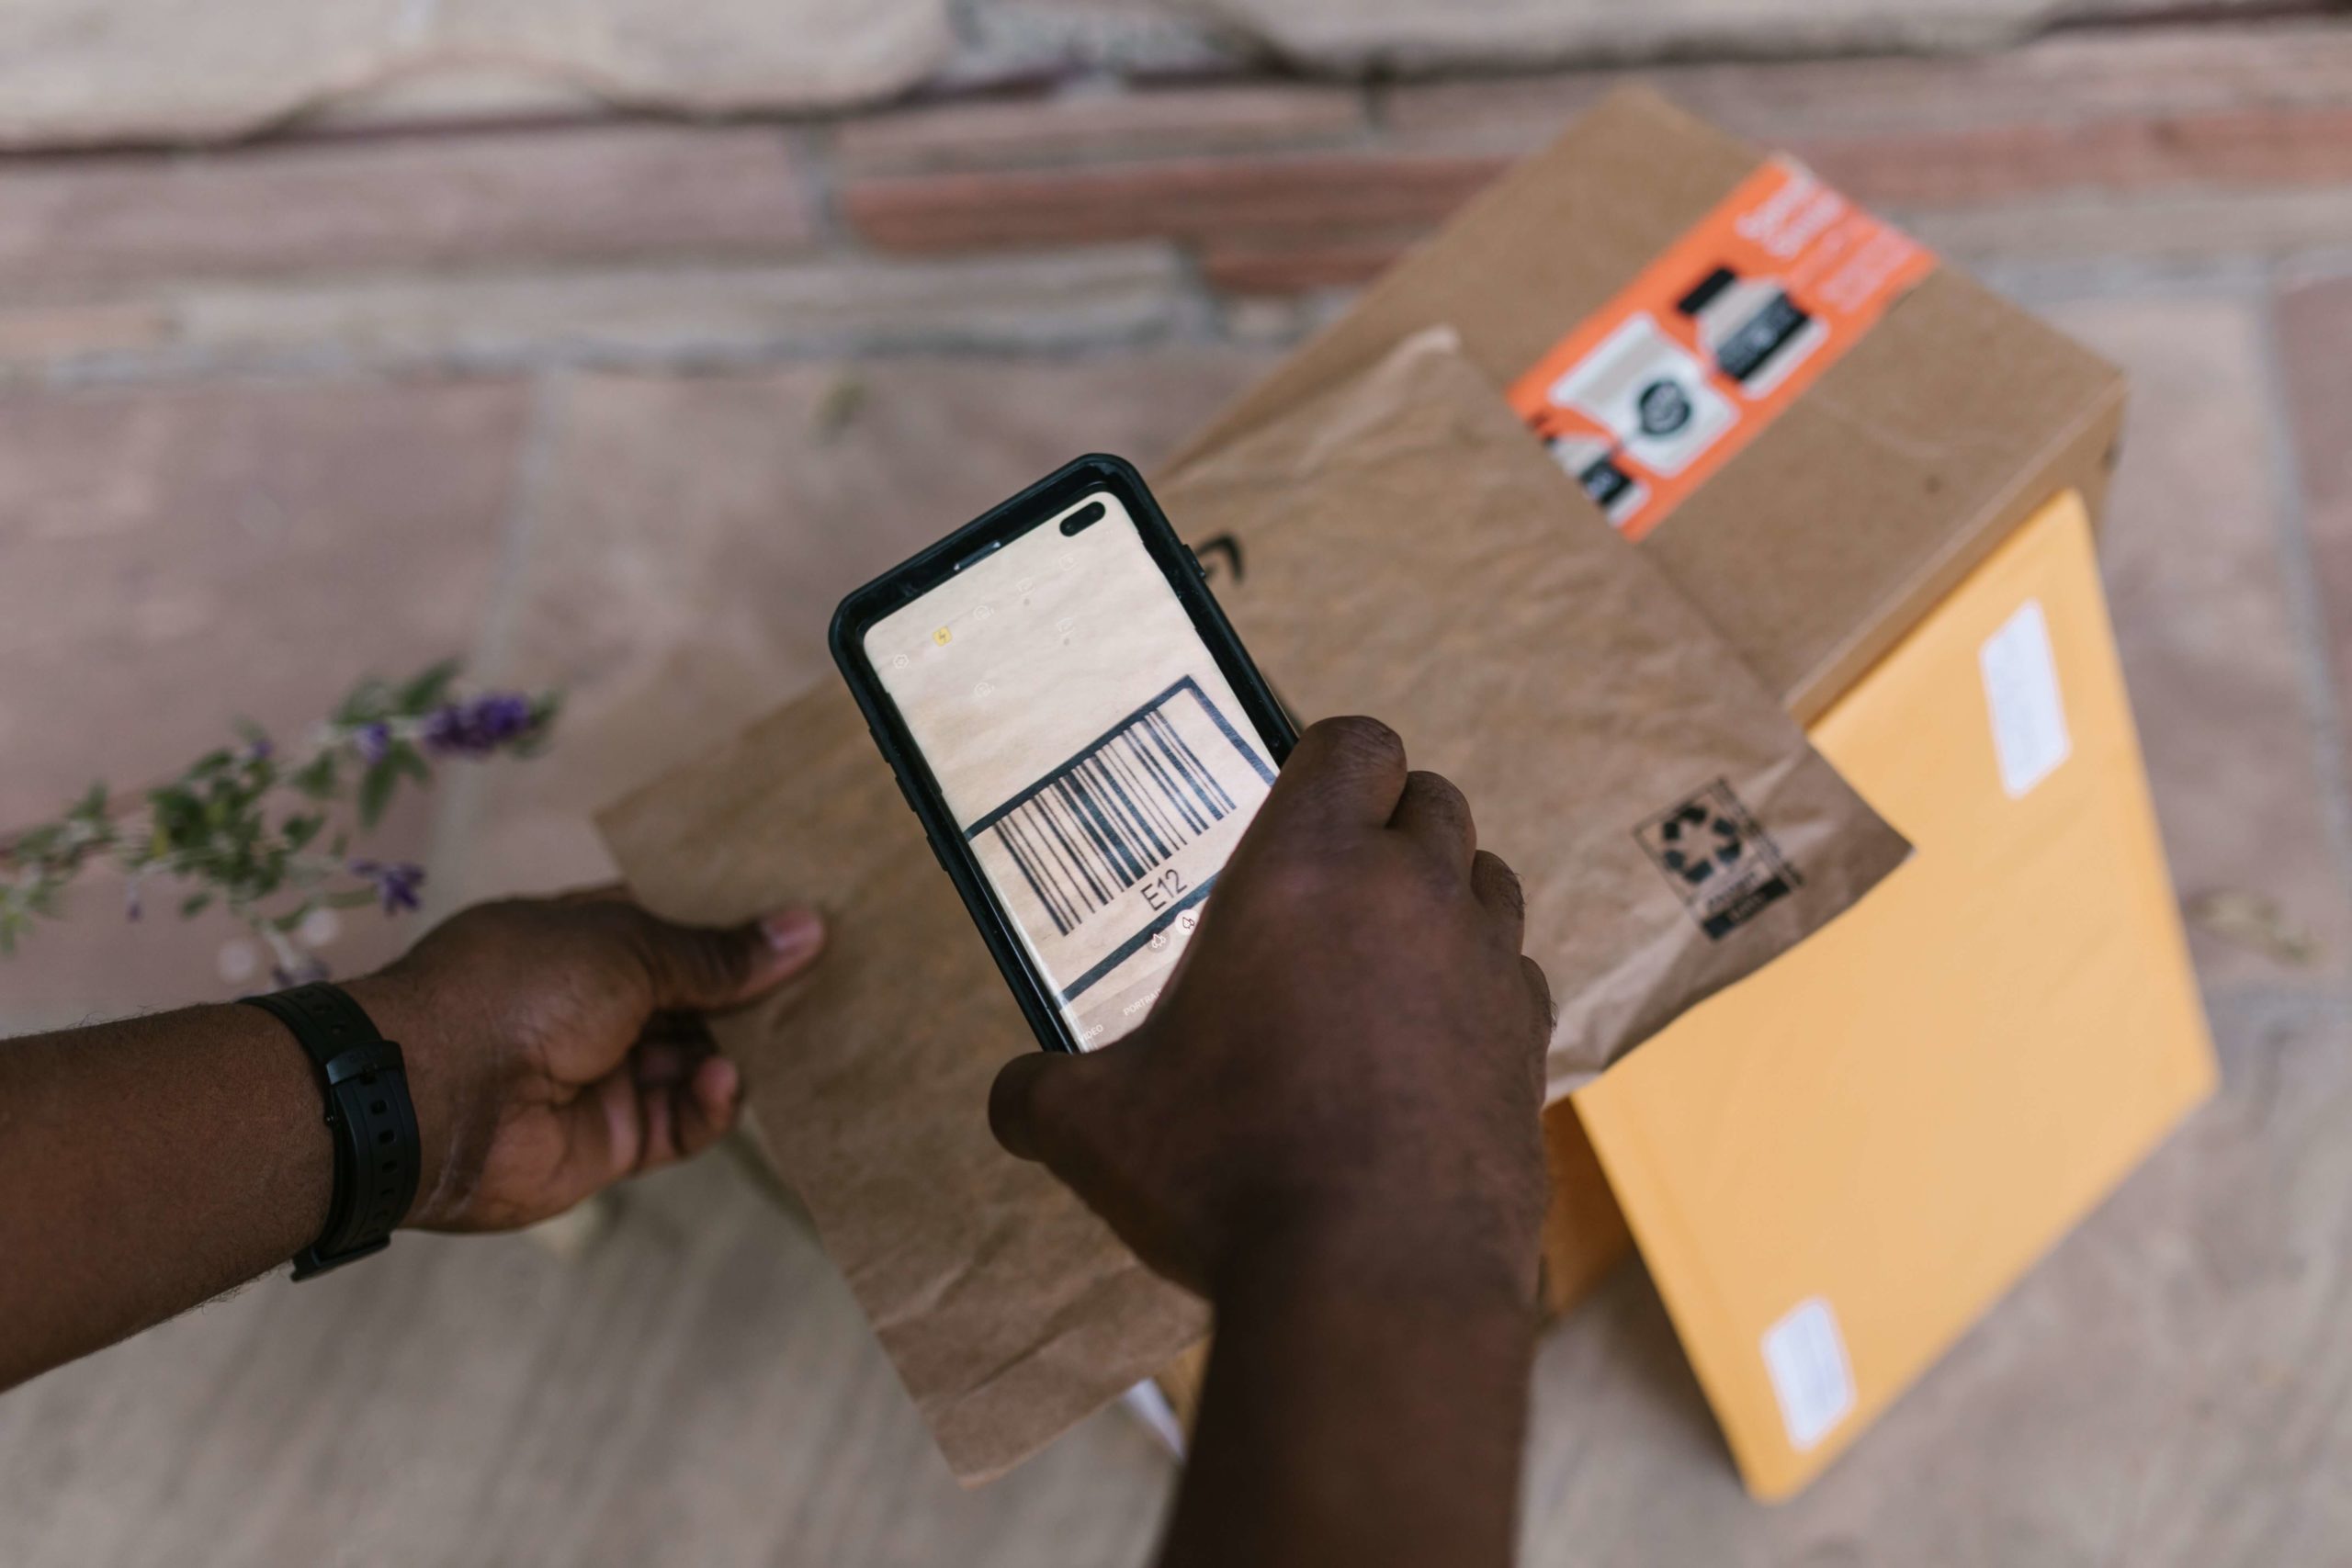 Scanning the barcode on the parcel via the phone